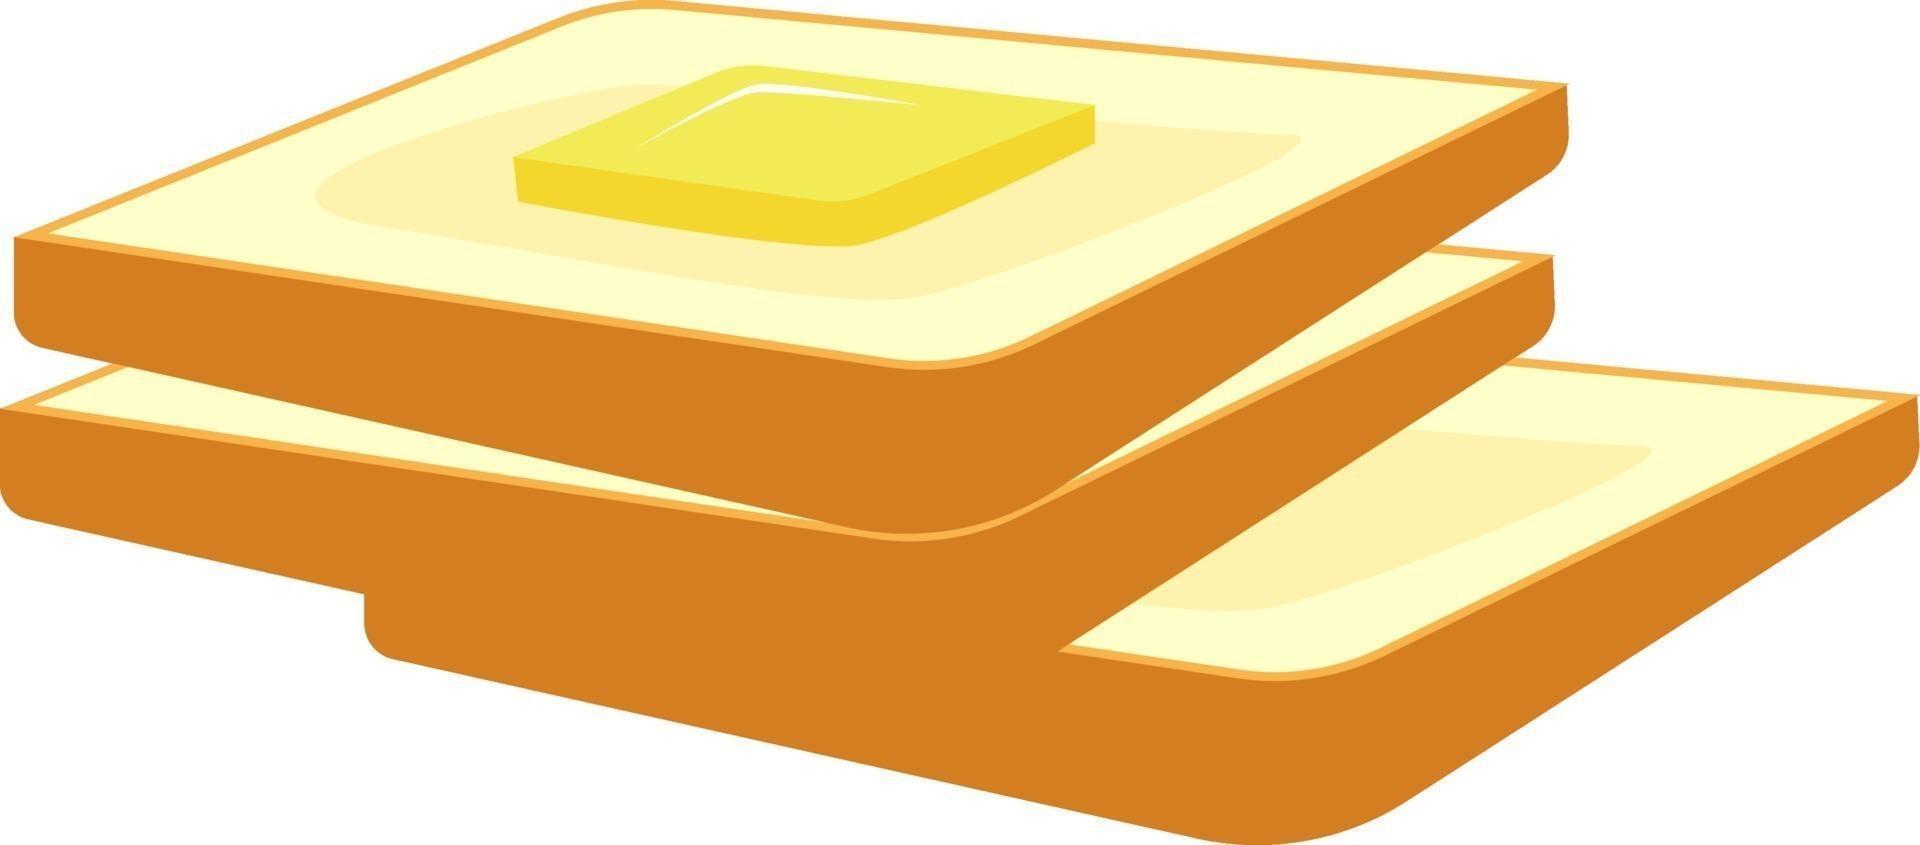 Bread with butter, illustration, vector on a white background.